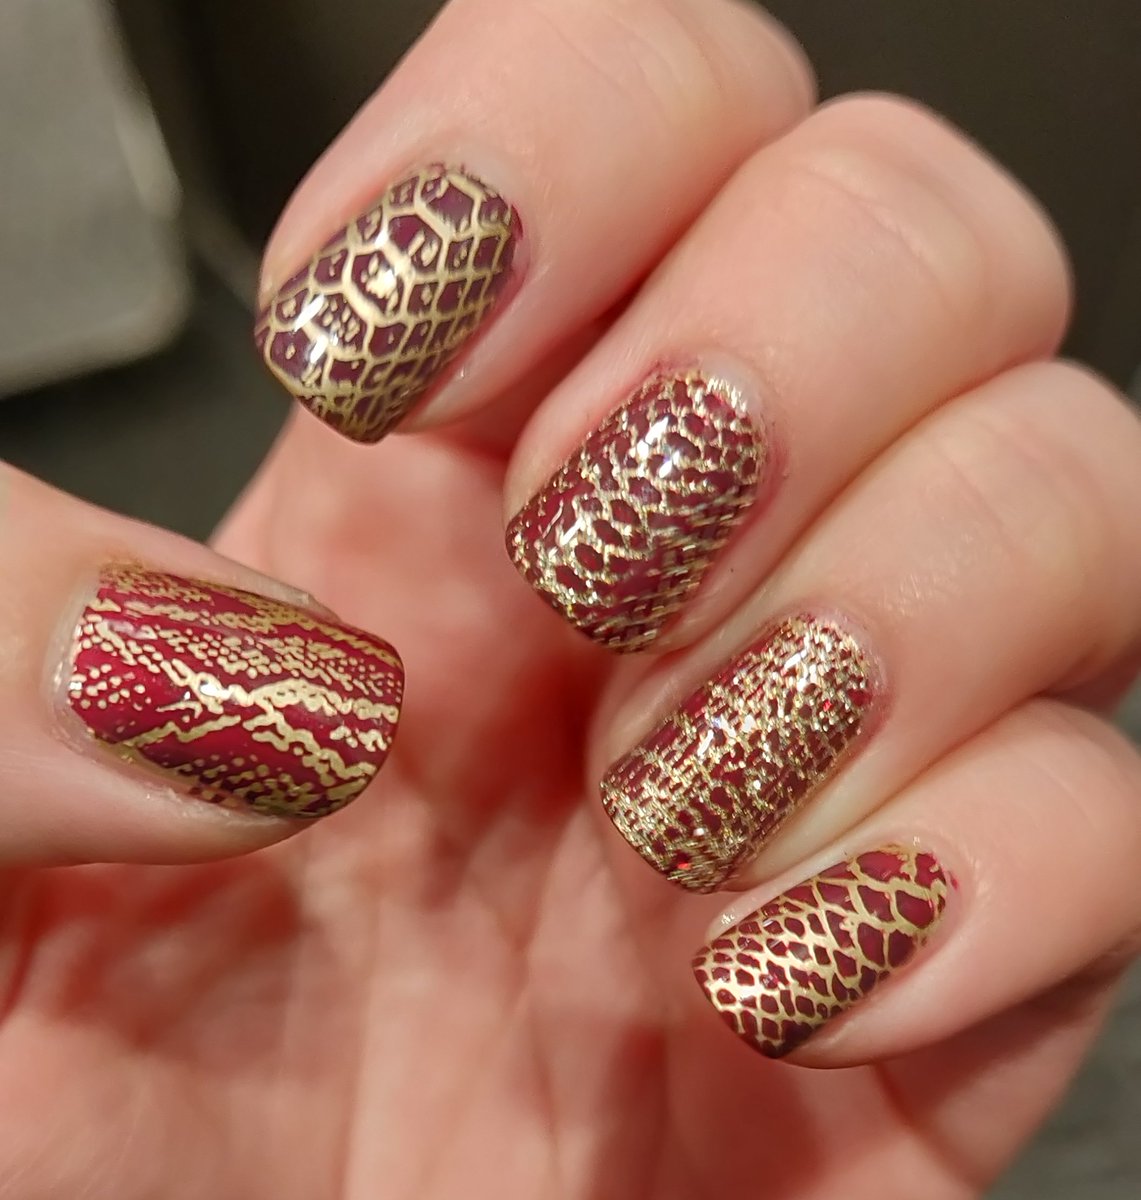 The lighting in this elevator was nice. Happy Thanksgiving everyone!
Finally playing with the Snakeskin Maniology stamping plate for these
--
#nailart #thanksgiving #thanksgivingnails #nailstamping #holonails #snakescales